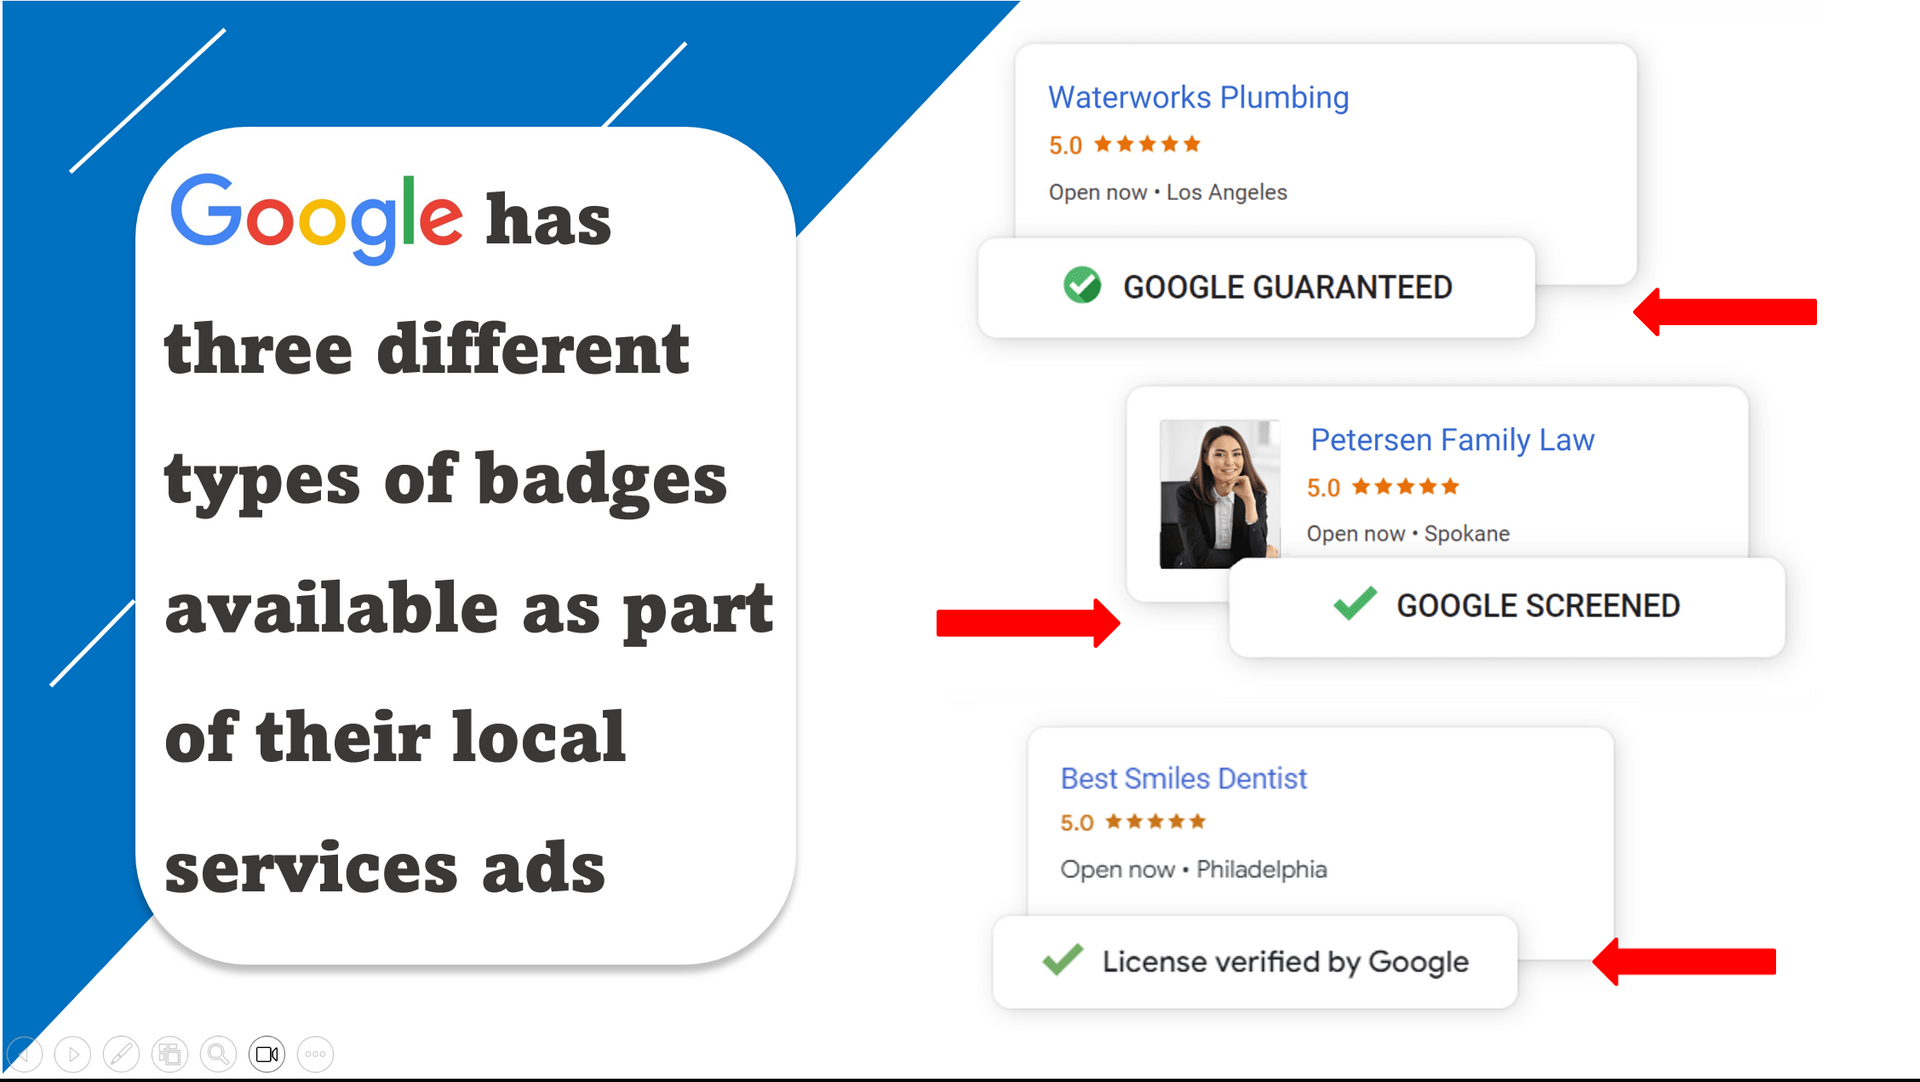 Google has three different types of badges available as part of their local services ads.